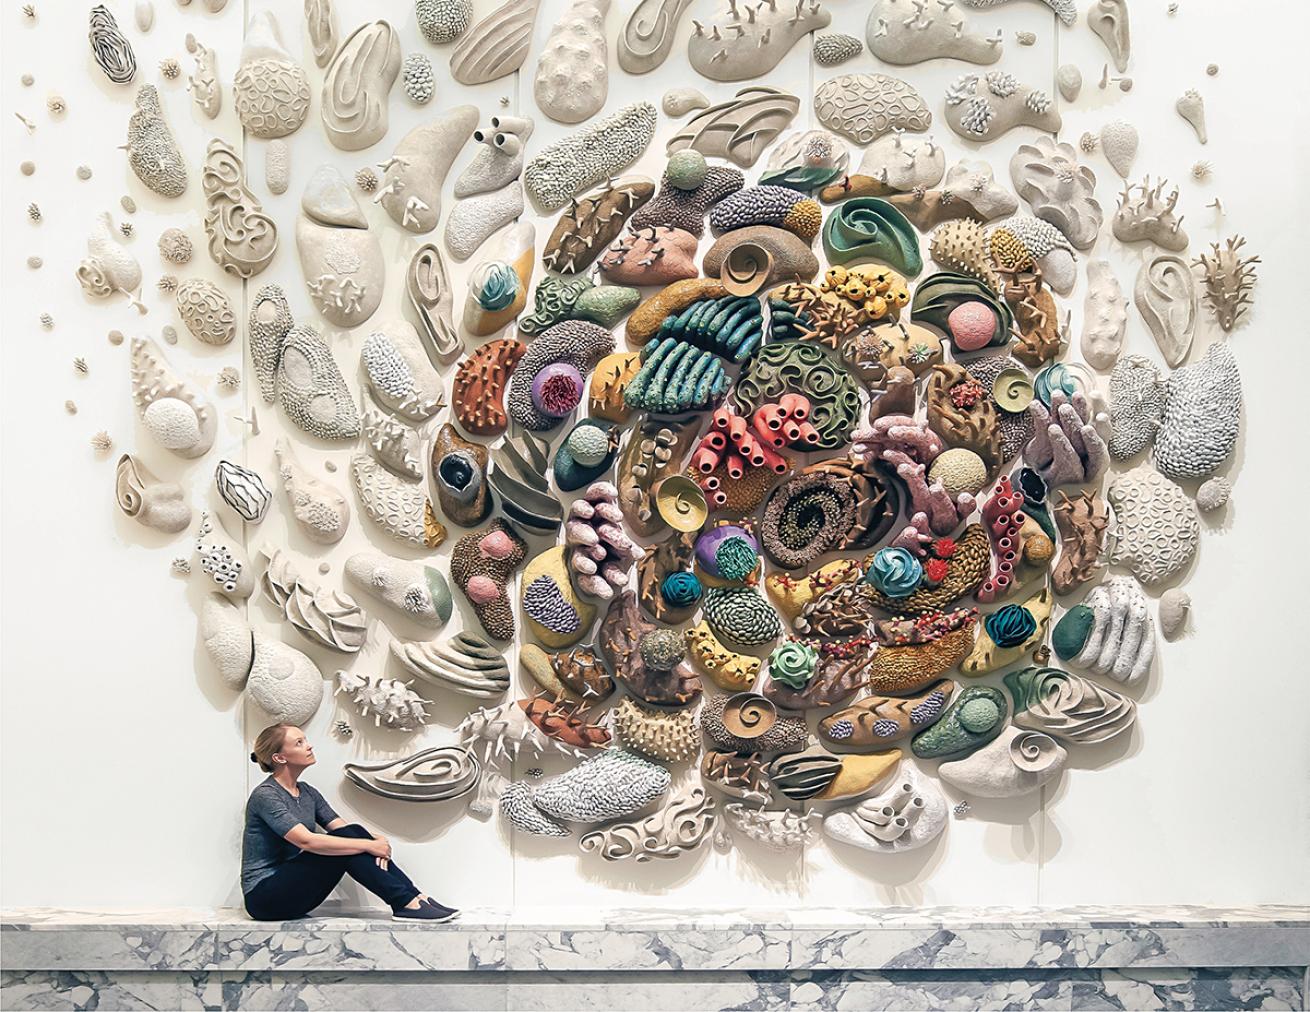 Artist Courtney Mattison sits in front of ceramic coral installation in the U.S. embassy in Indonesia